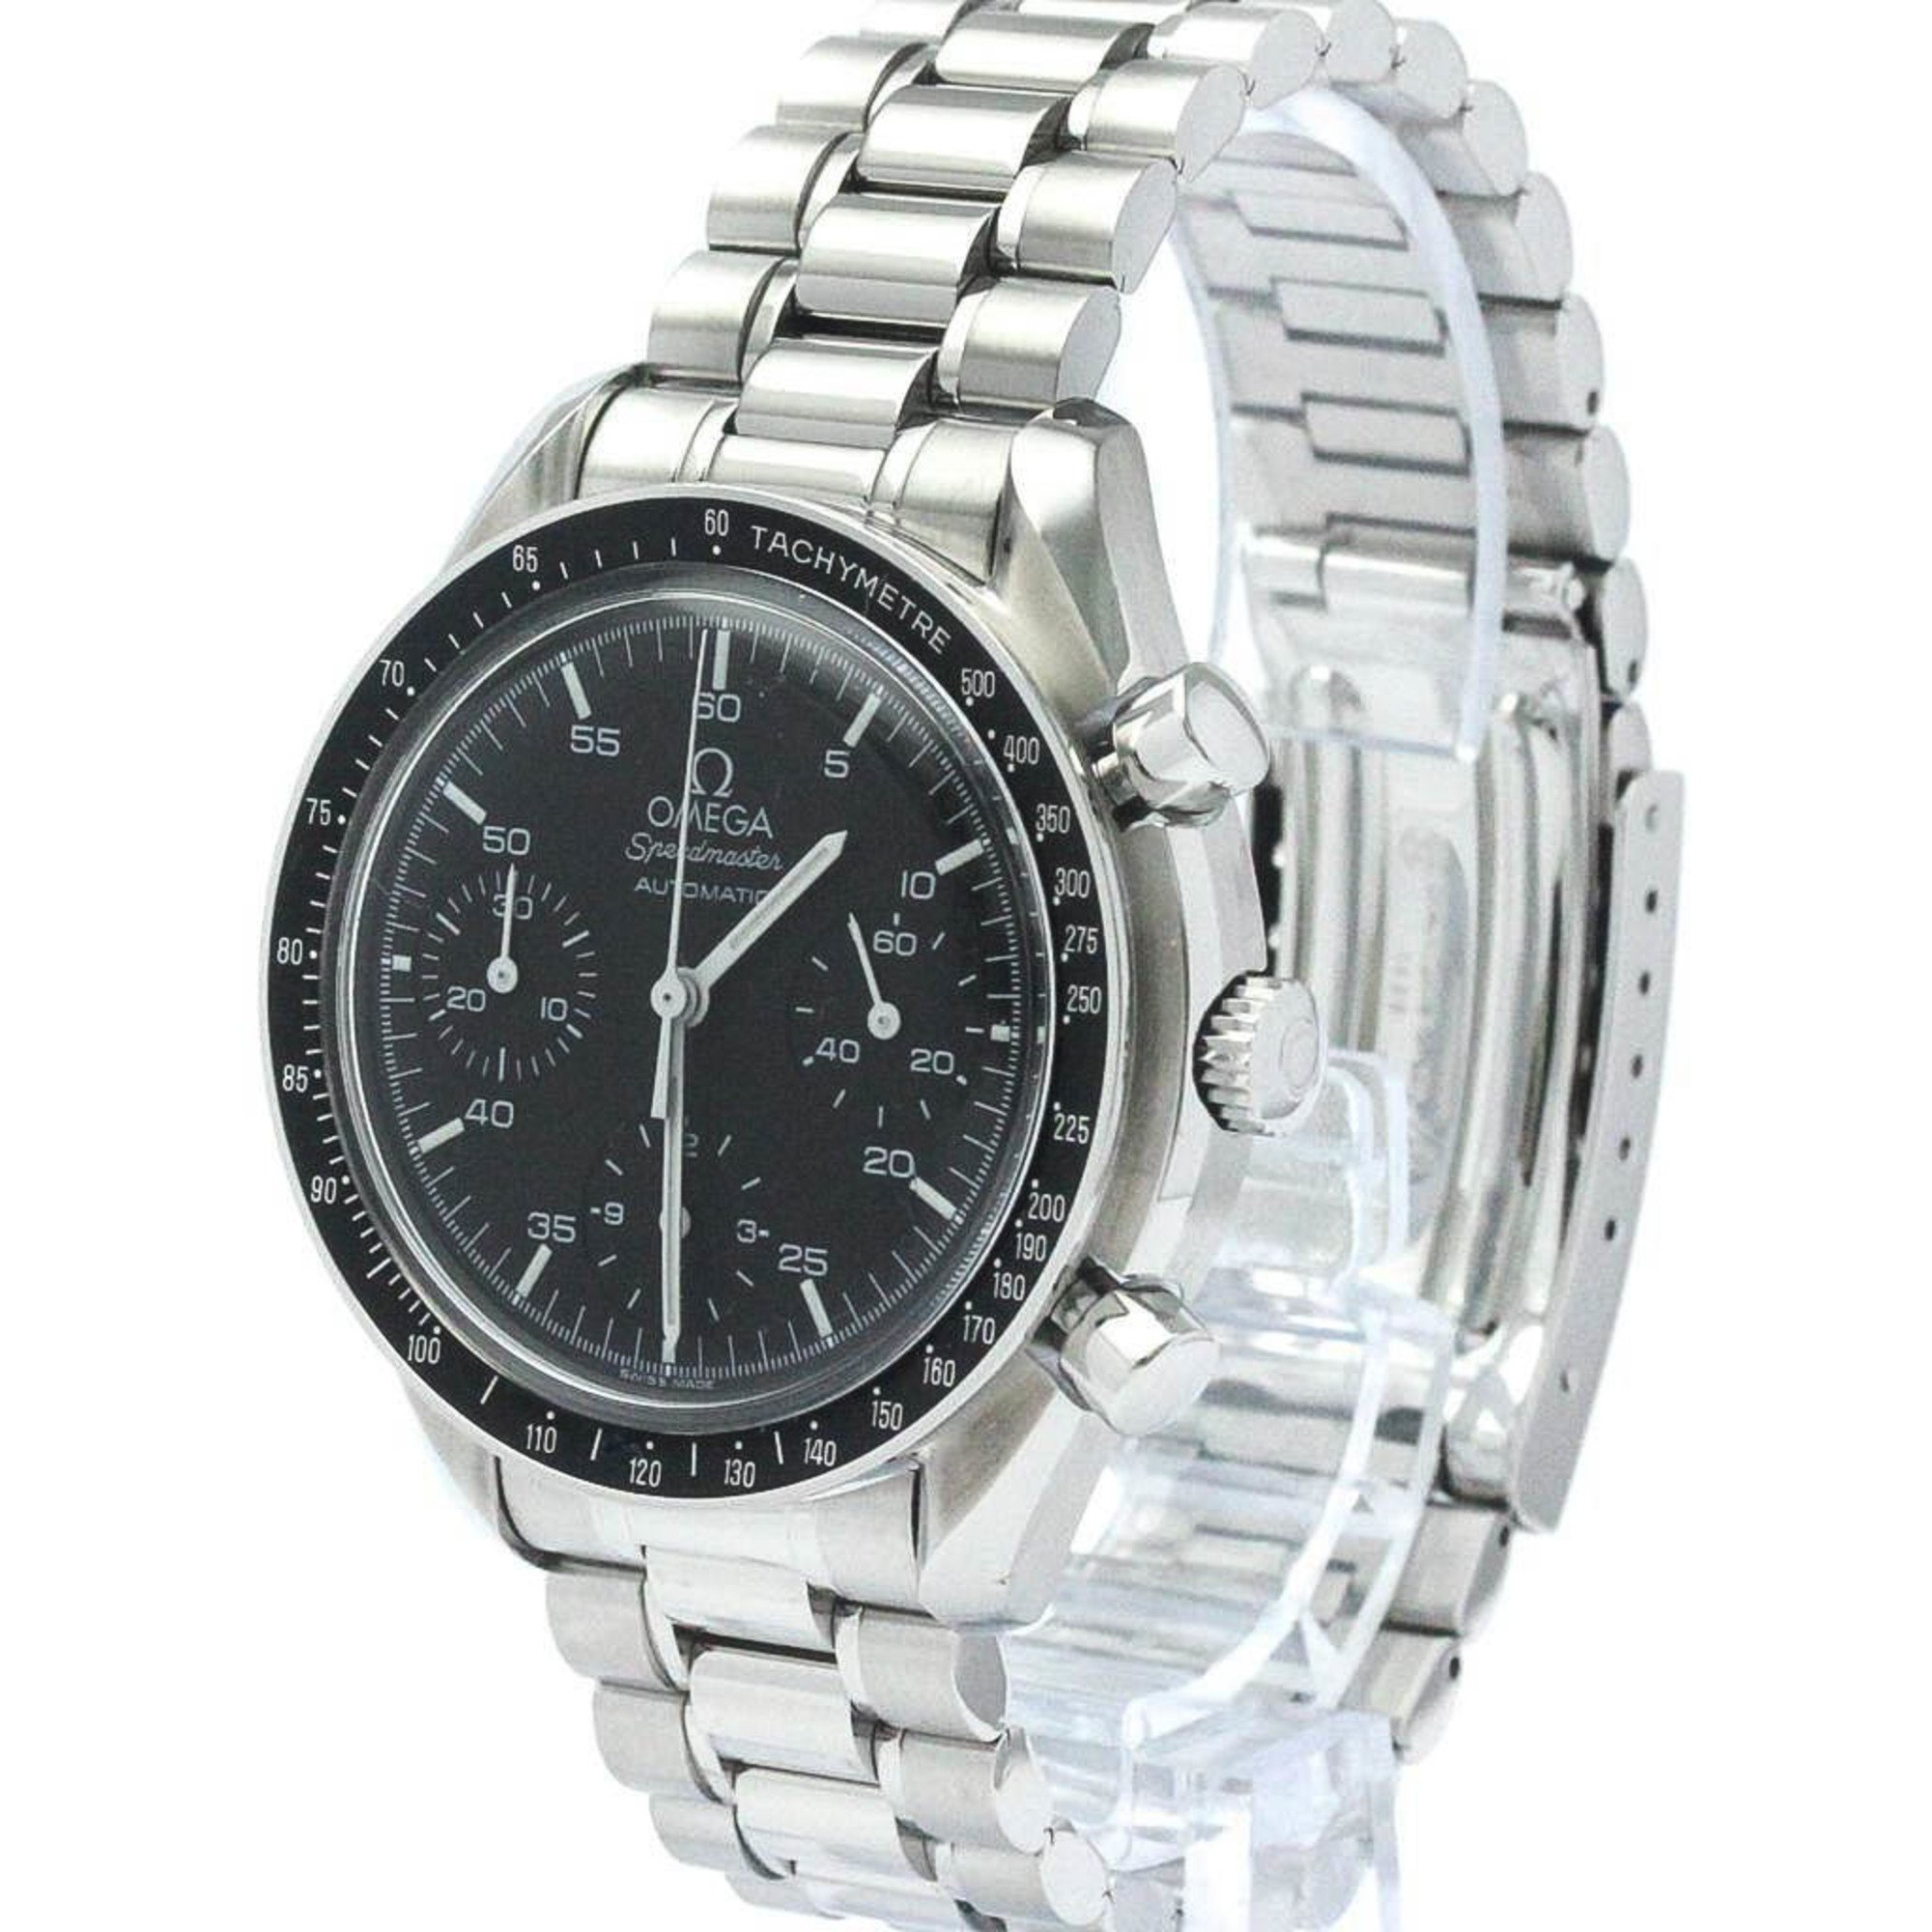 Polished OMEGA Speedmaster Automatic Steel Mens Watch 3510.50 BF567961